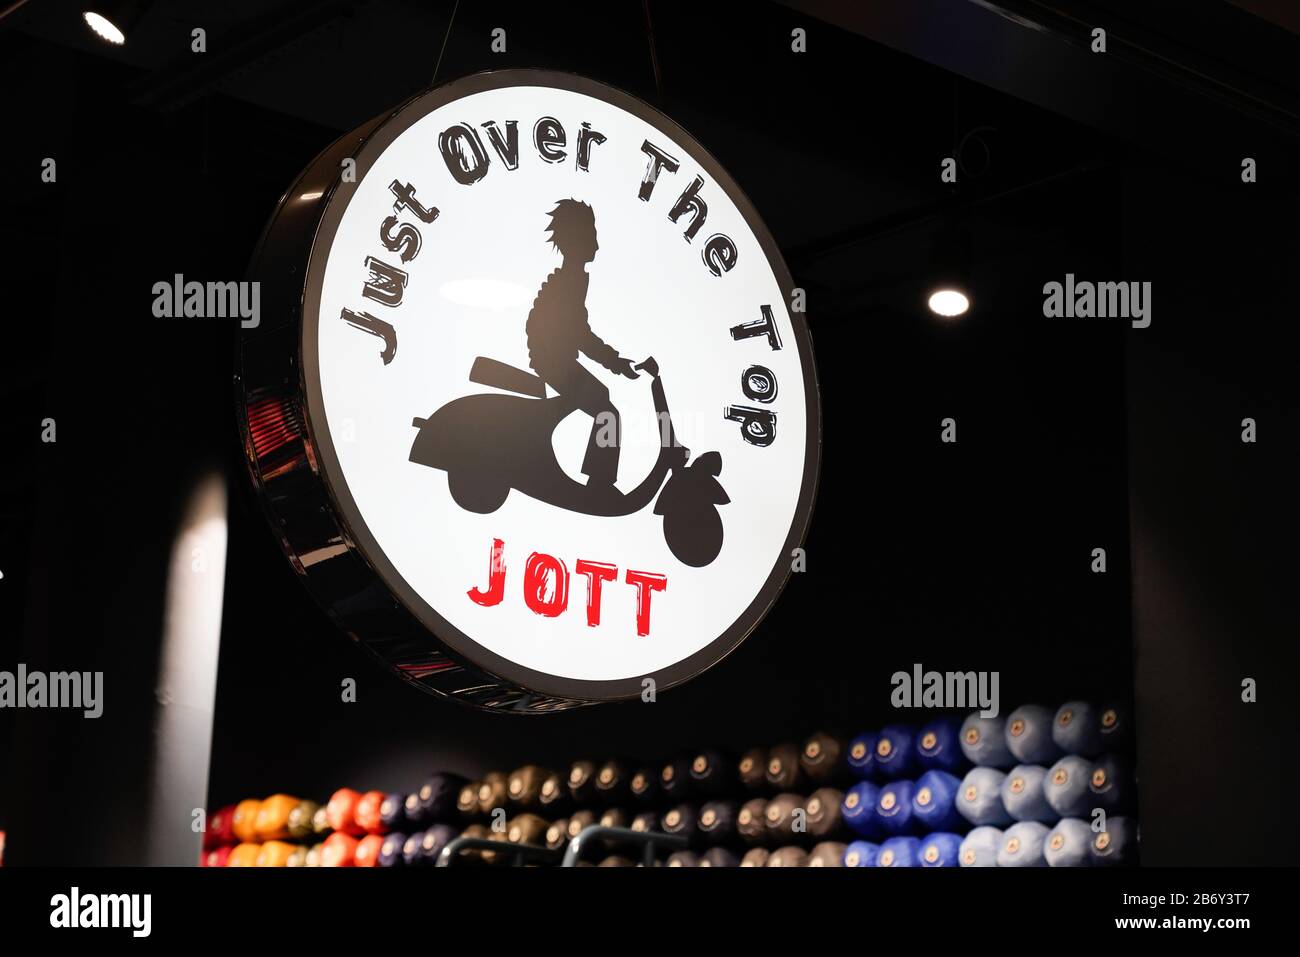 Bordeaux , Aquitaine / France - 01 22 2020 : Jott logo Just over the top  store signage French shop chain of streetwear fashion stores Stock Photo -  Alamy